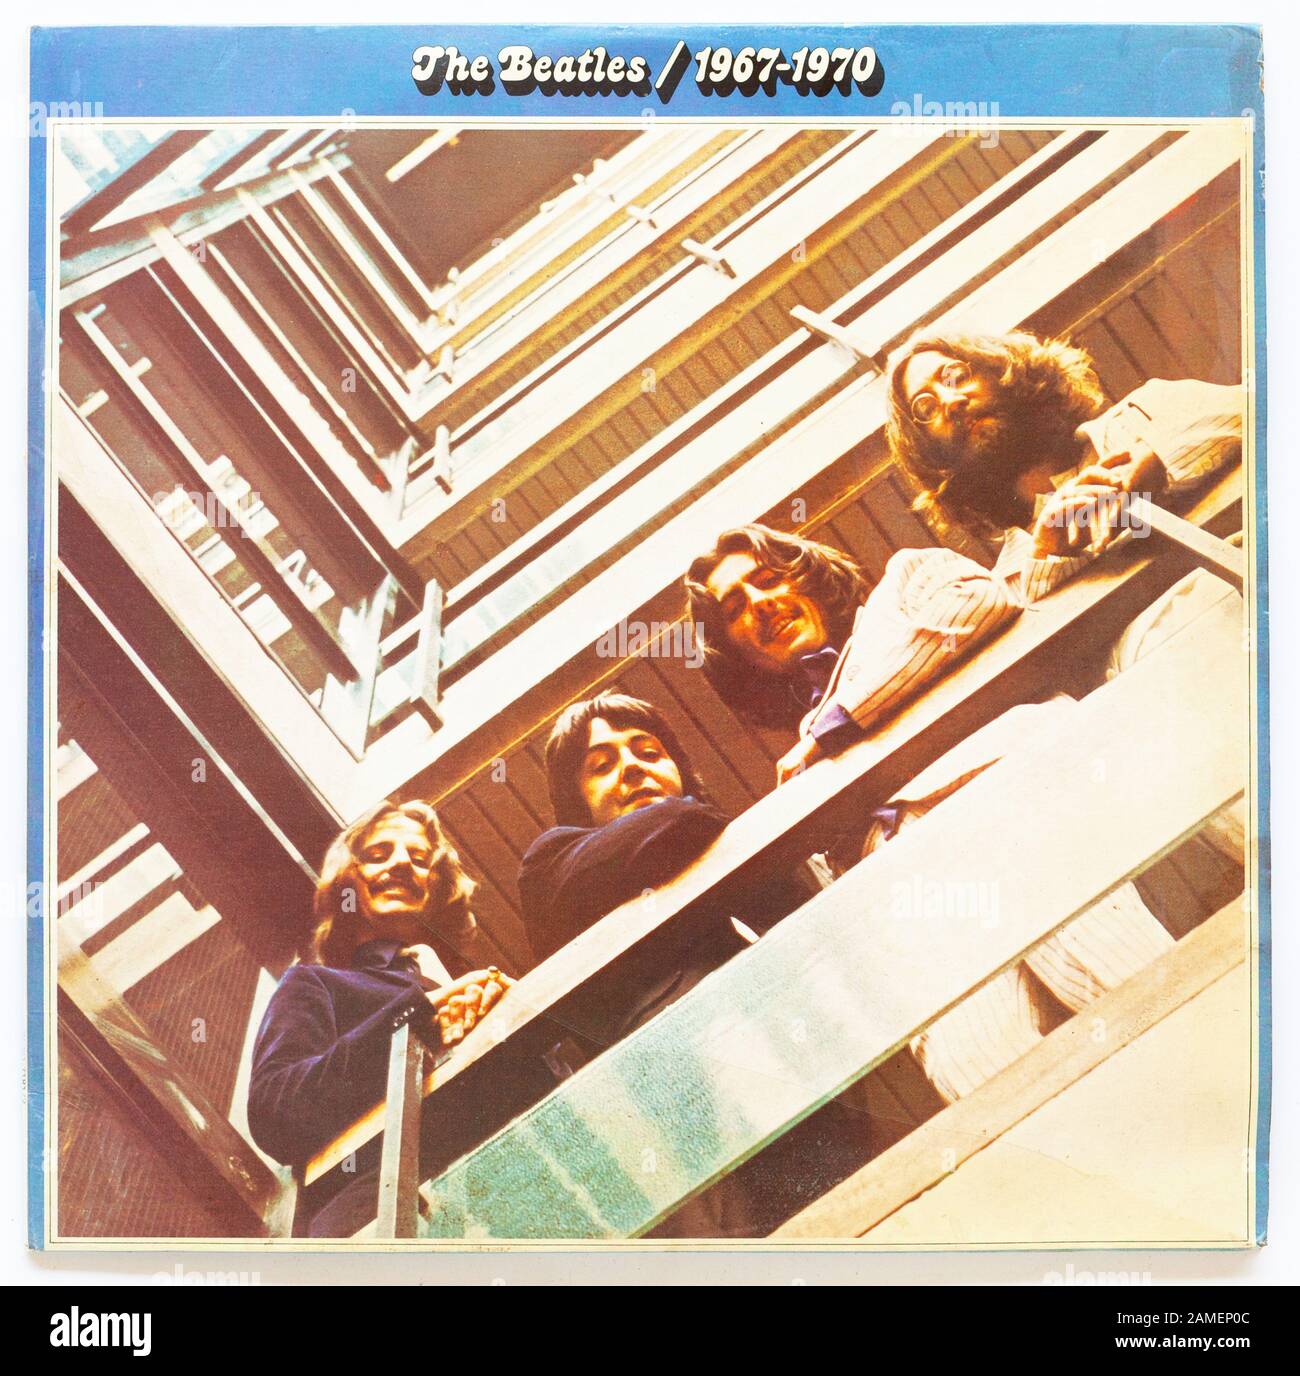 The cover of The Beatles / 1967-1970 (The Blue Album),  1973 album by The Beatles on Parlaphone - Editorial use only Stock Photo